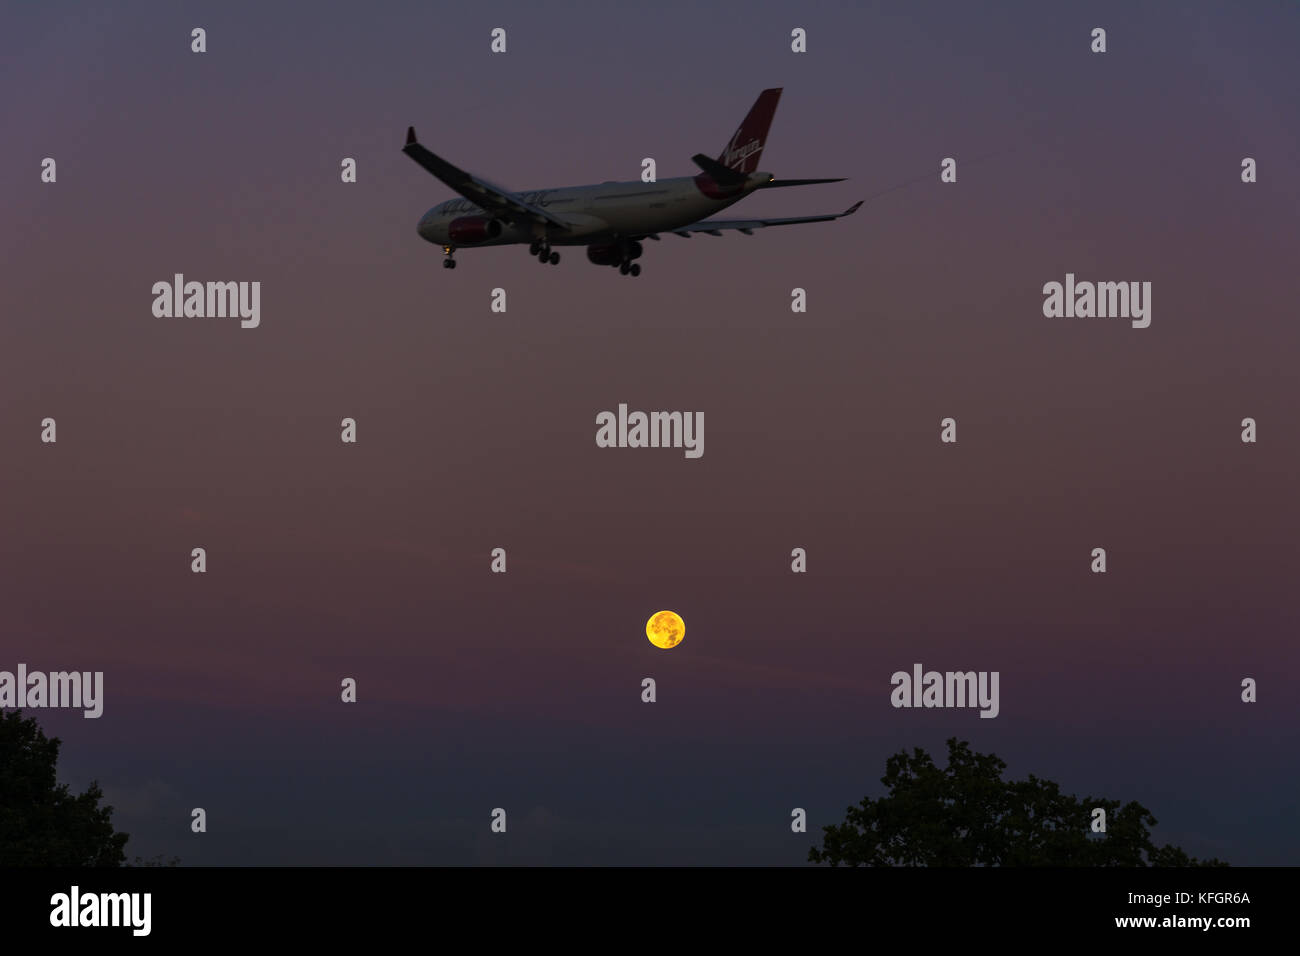 Virgin airlines plane approach Manchester airport. Harvest moon in the background. Stock Photo